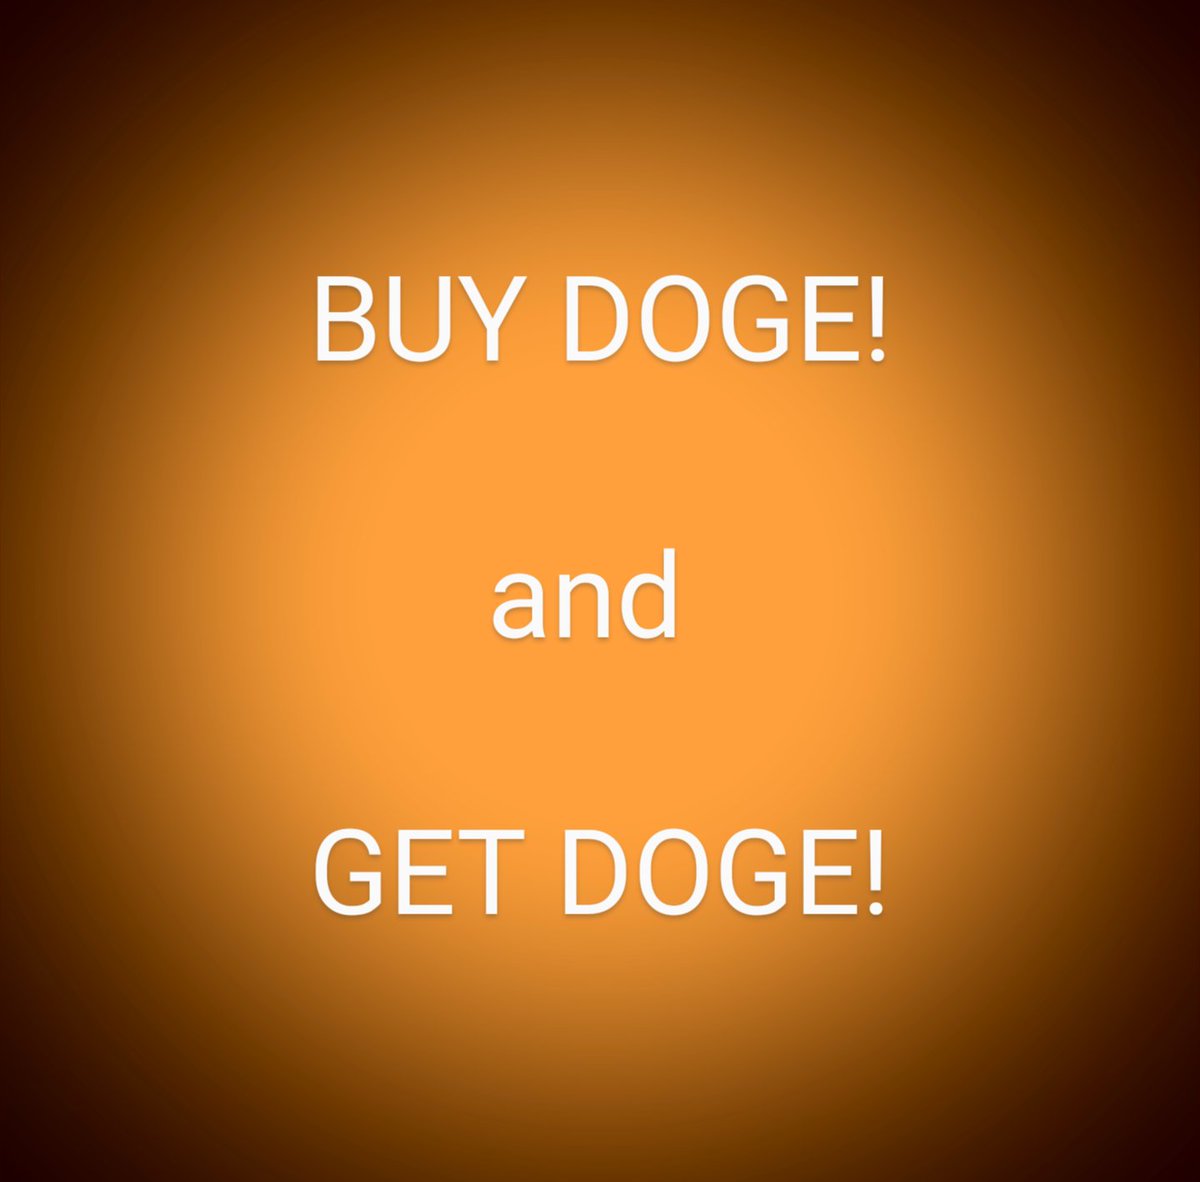 To the masses... Important message!

#dogecoin #1fogeequals1doge
#dogefamily